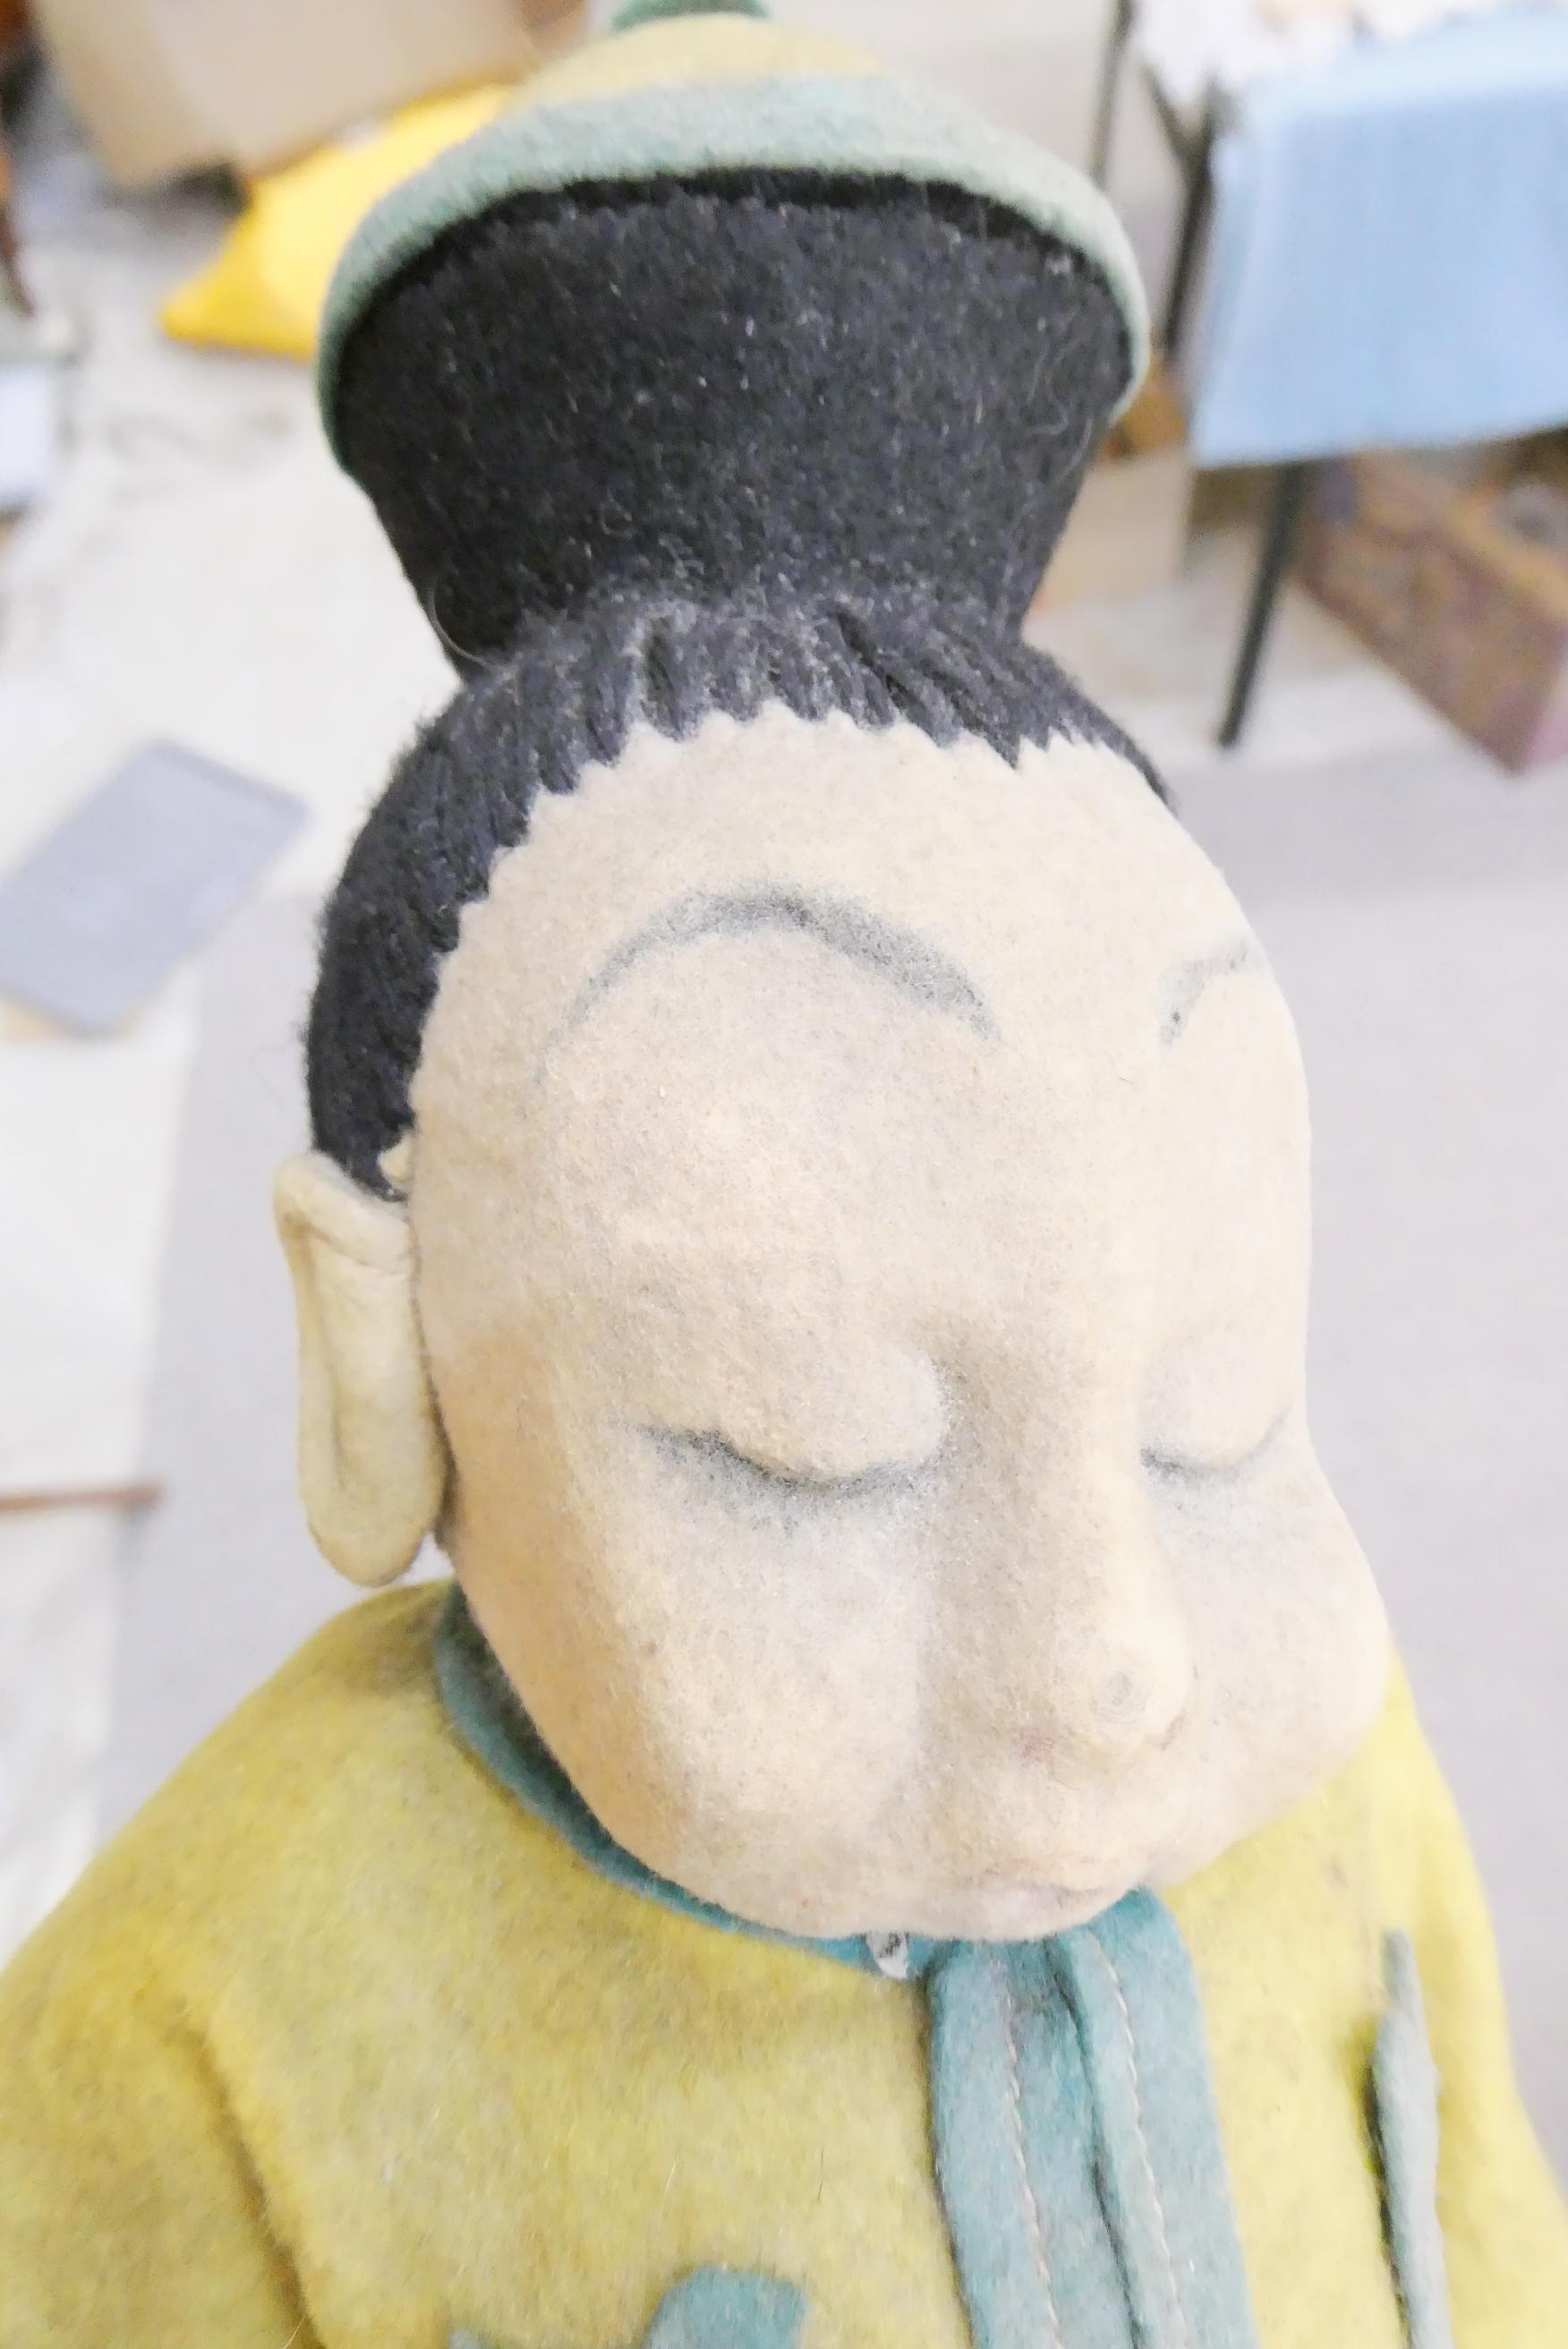 A rare pre-war Lenci opium seller doll, jointed shoulders, hips and neck, felt body and clothing, - Image 4 of 11